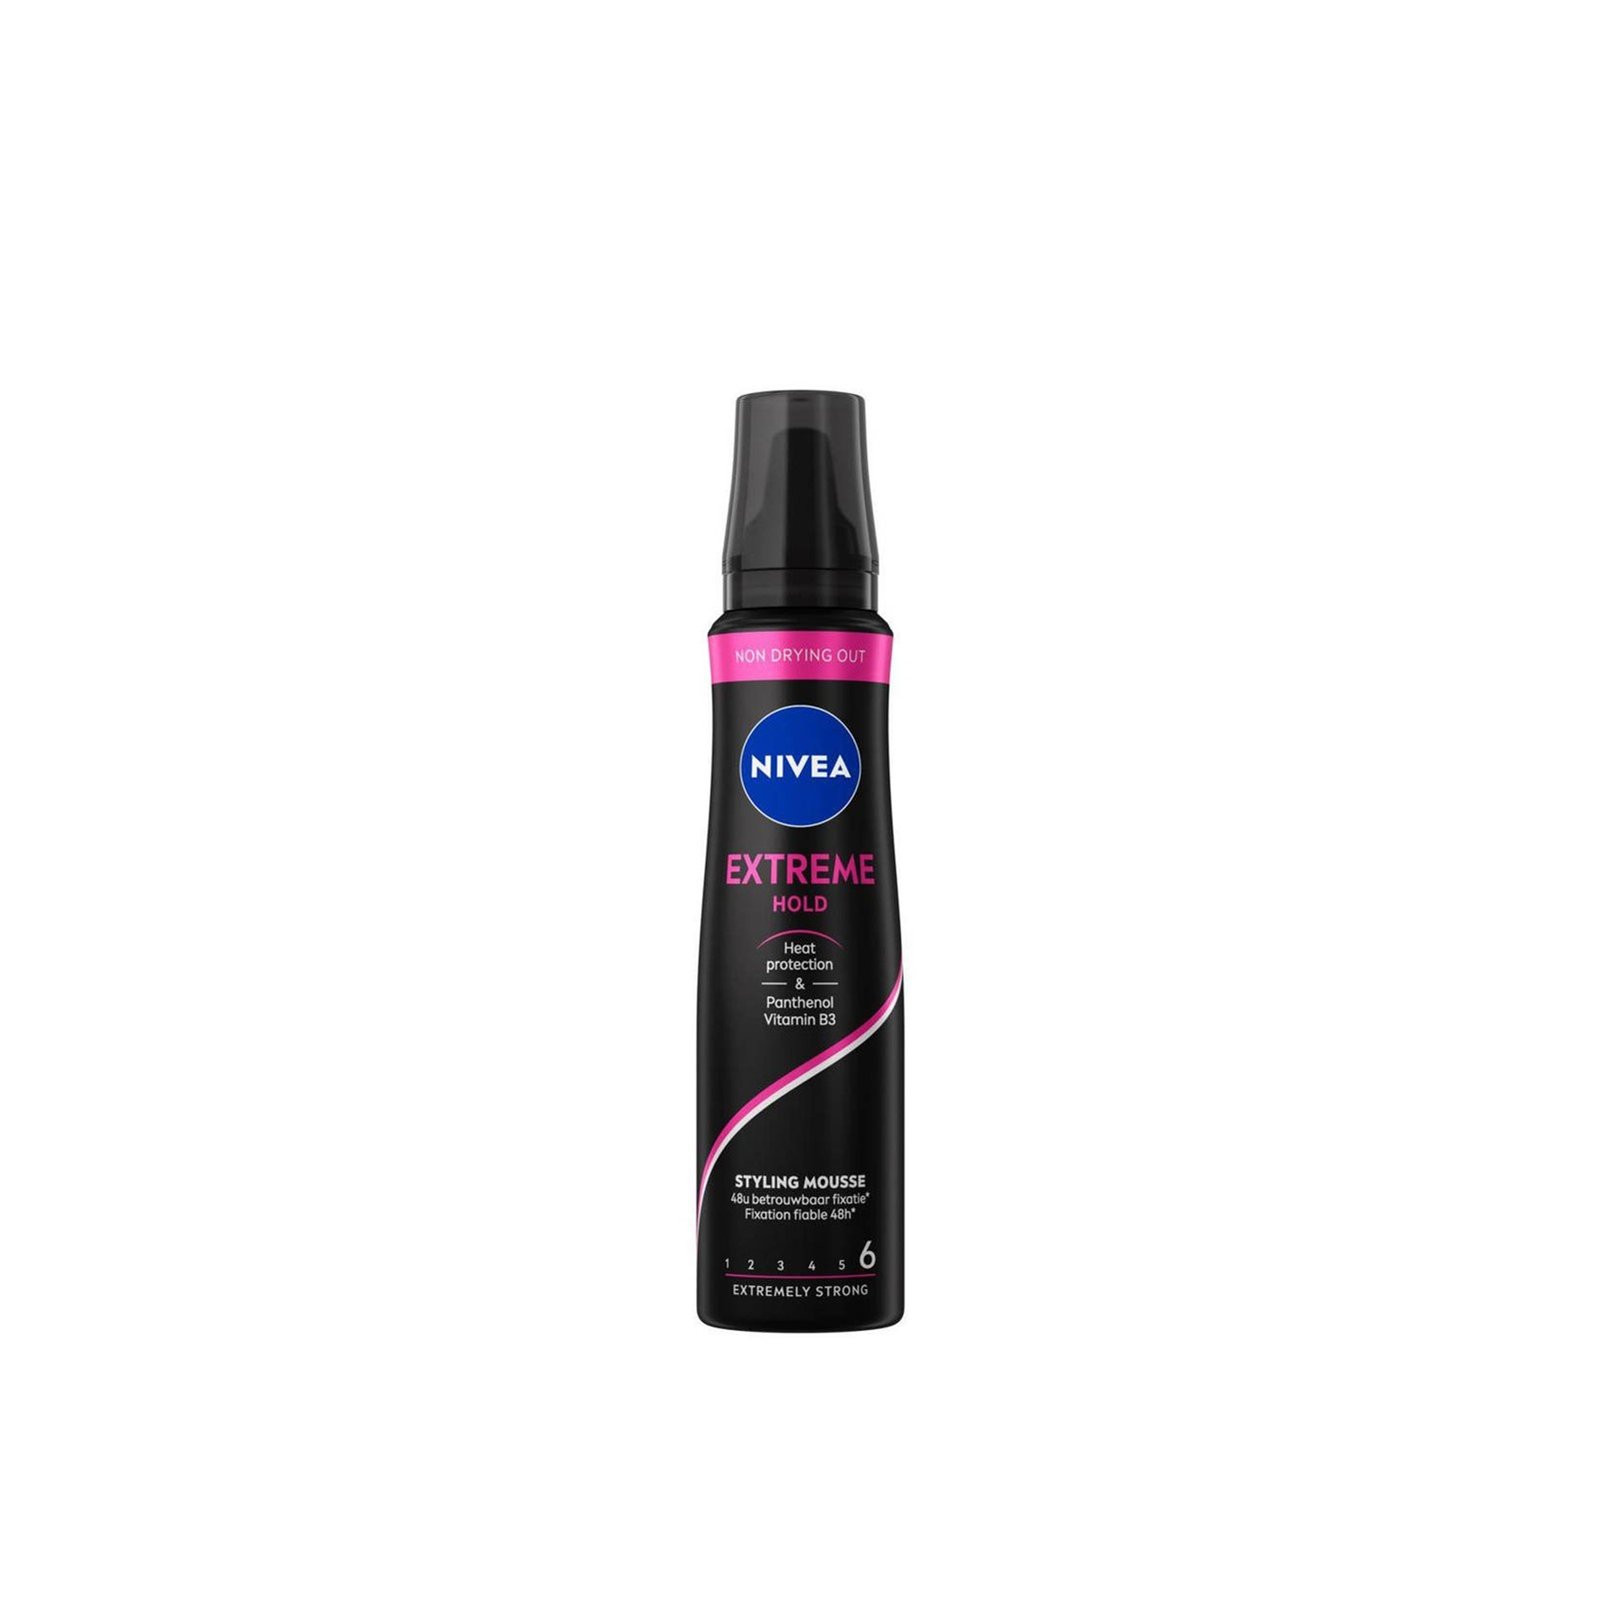 Nivea Extreme Hold Styling Mousse Extremely Strong 150ml (5.07)